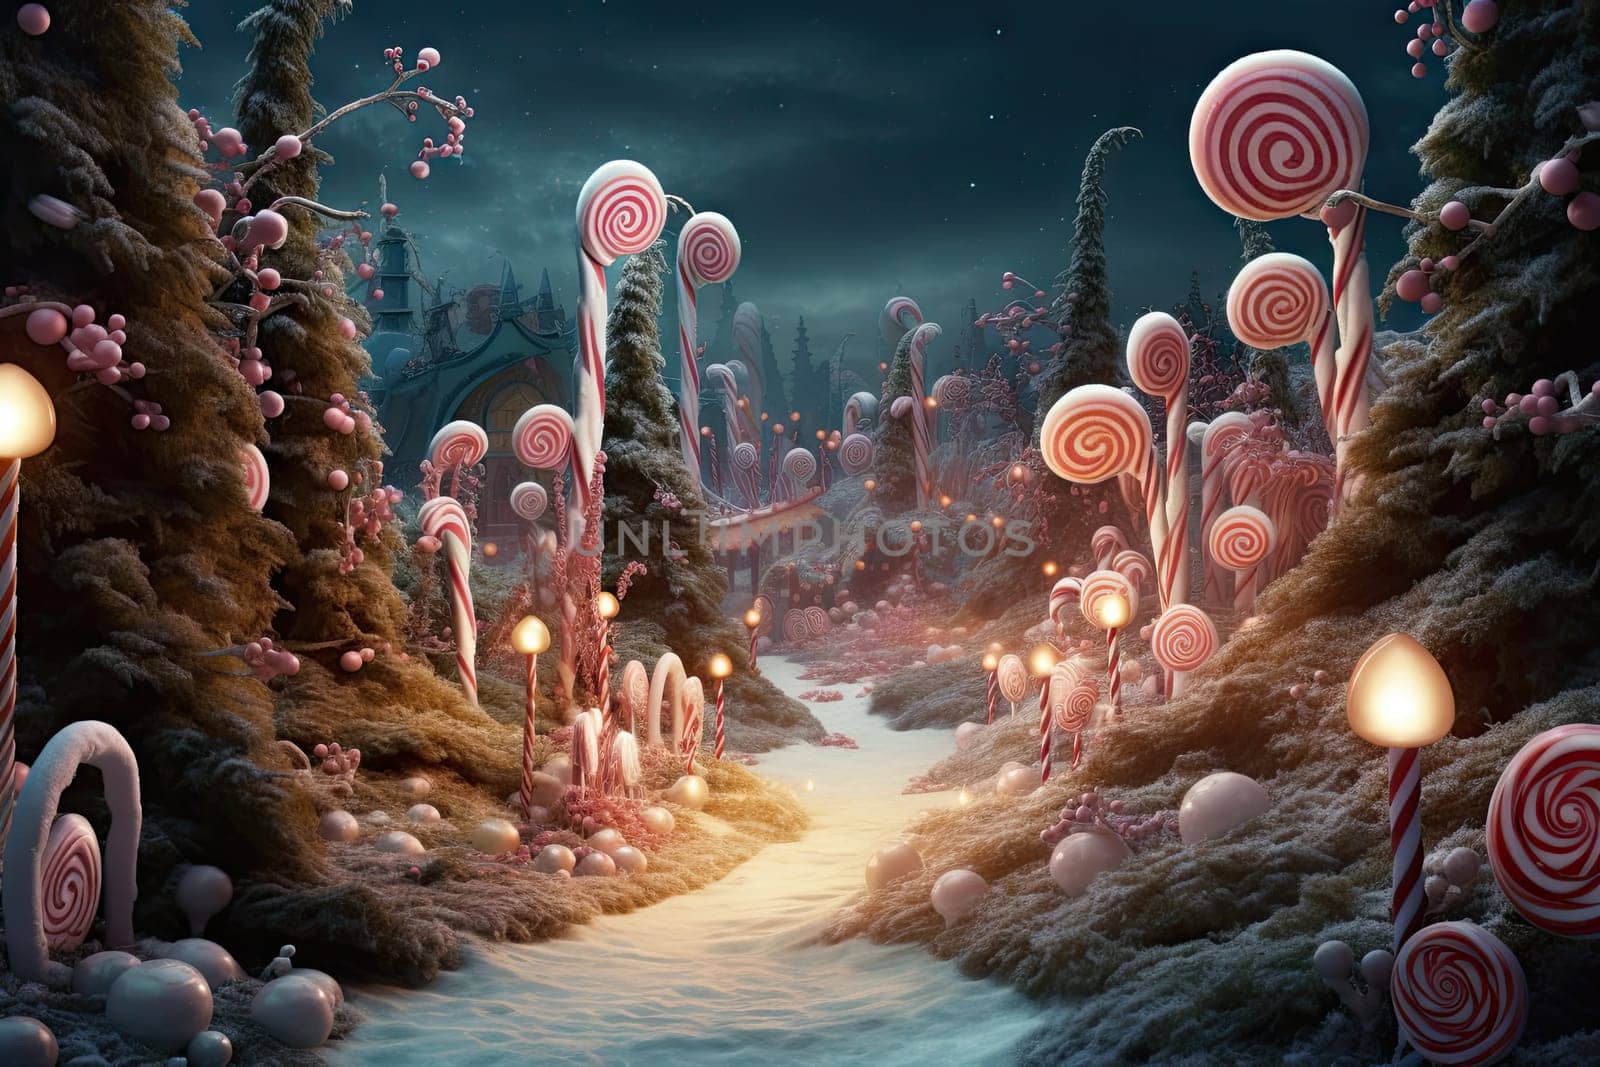 A Dreamy Journey Through Candy Land Under the Starry Night Sky